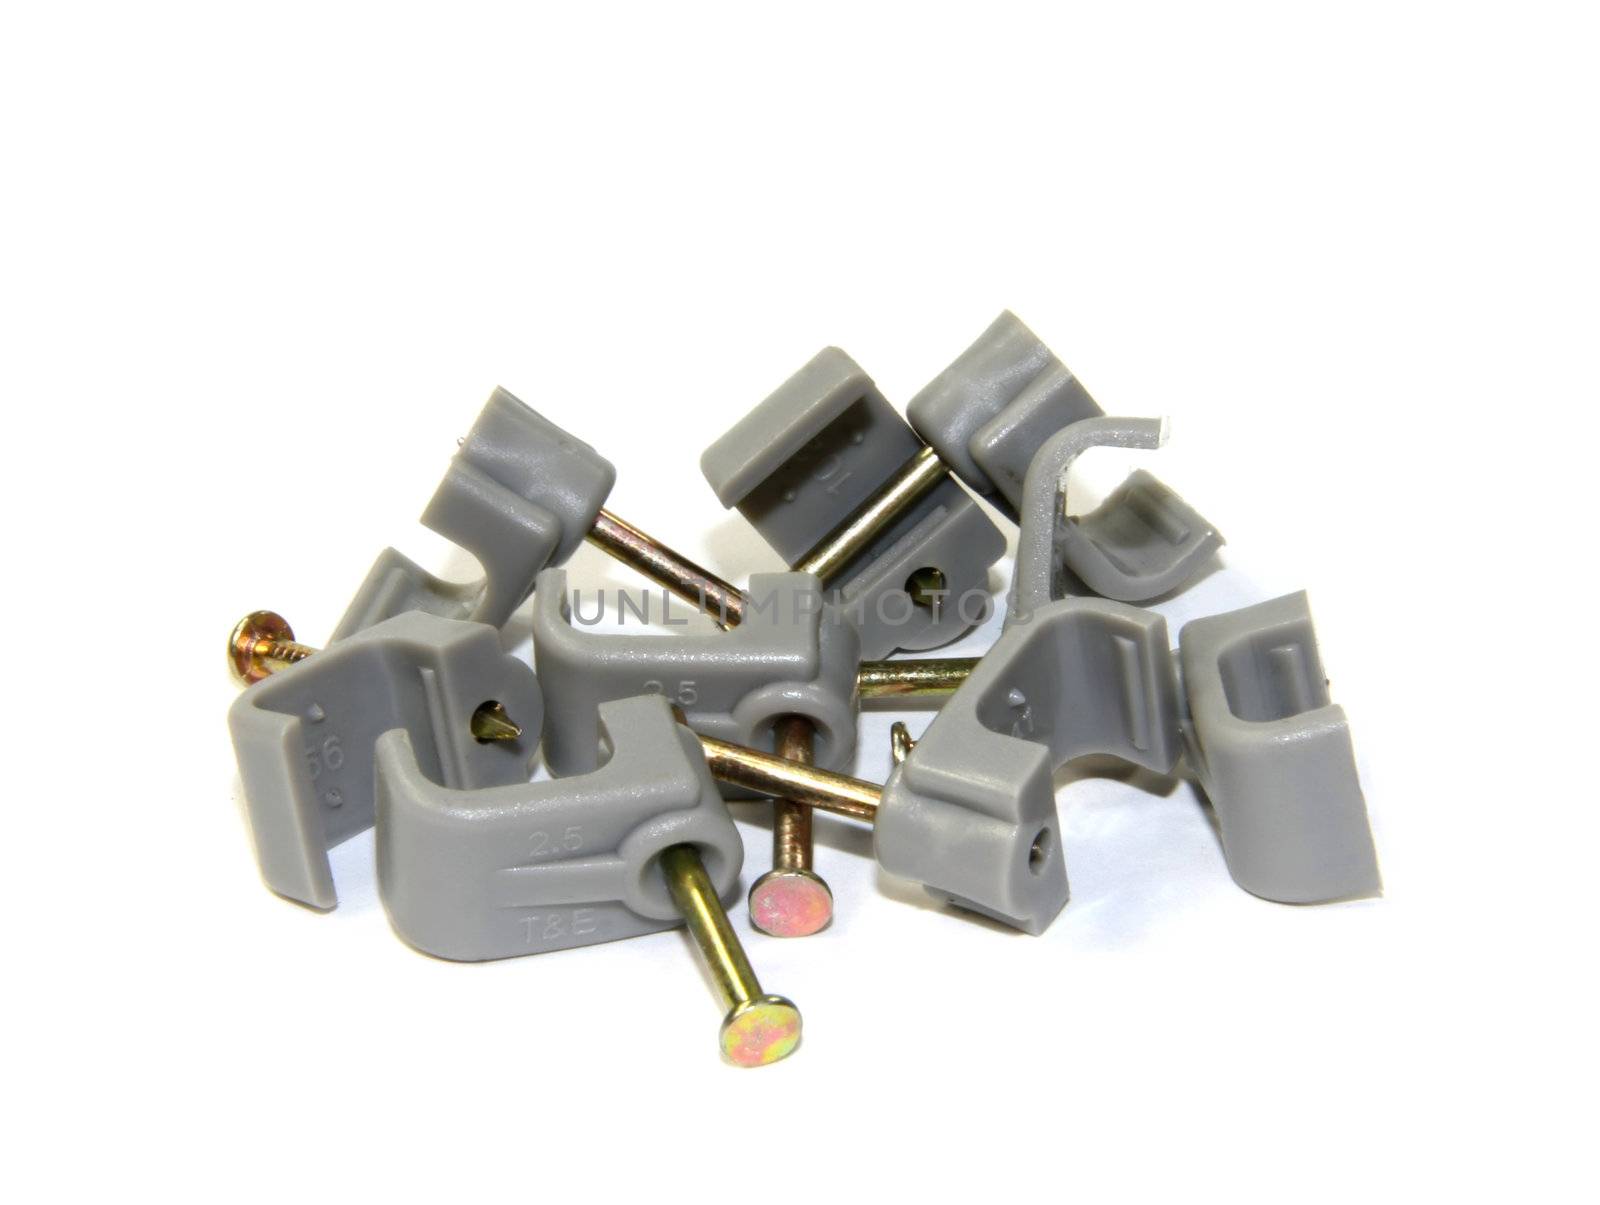 Electricians Electrical Cable Clips